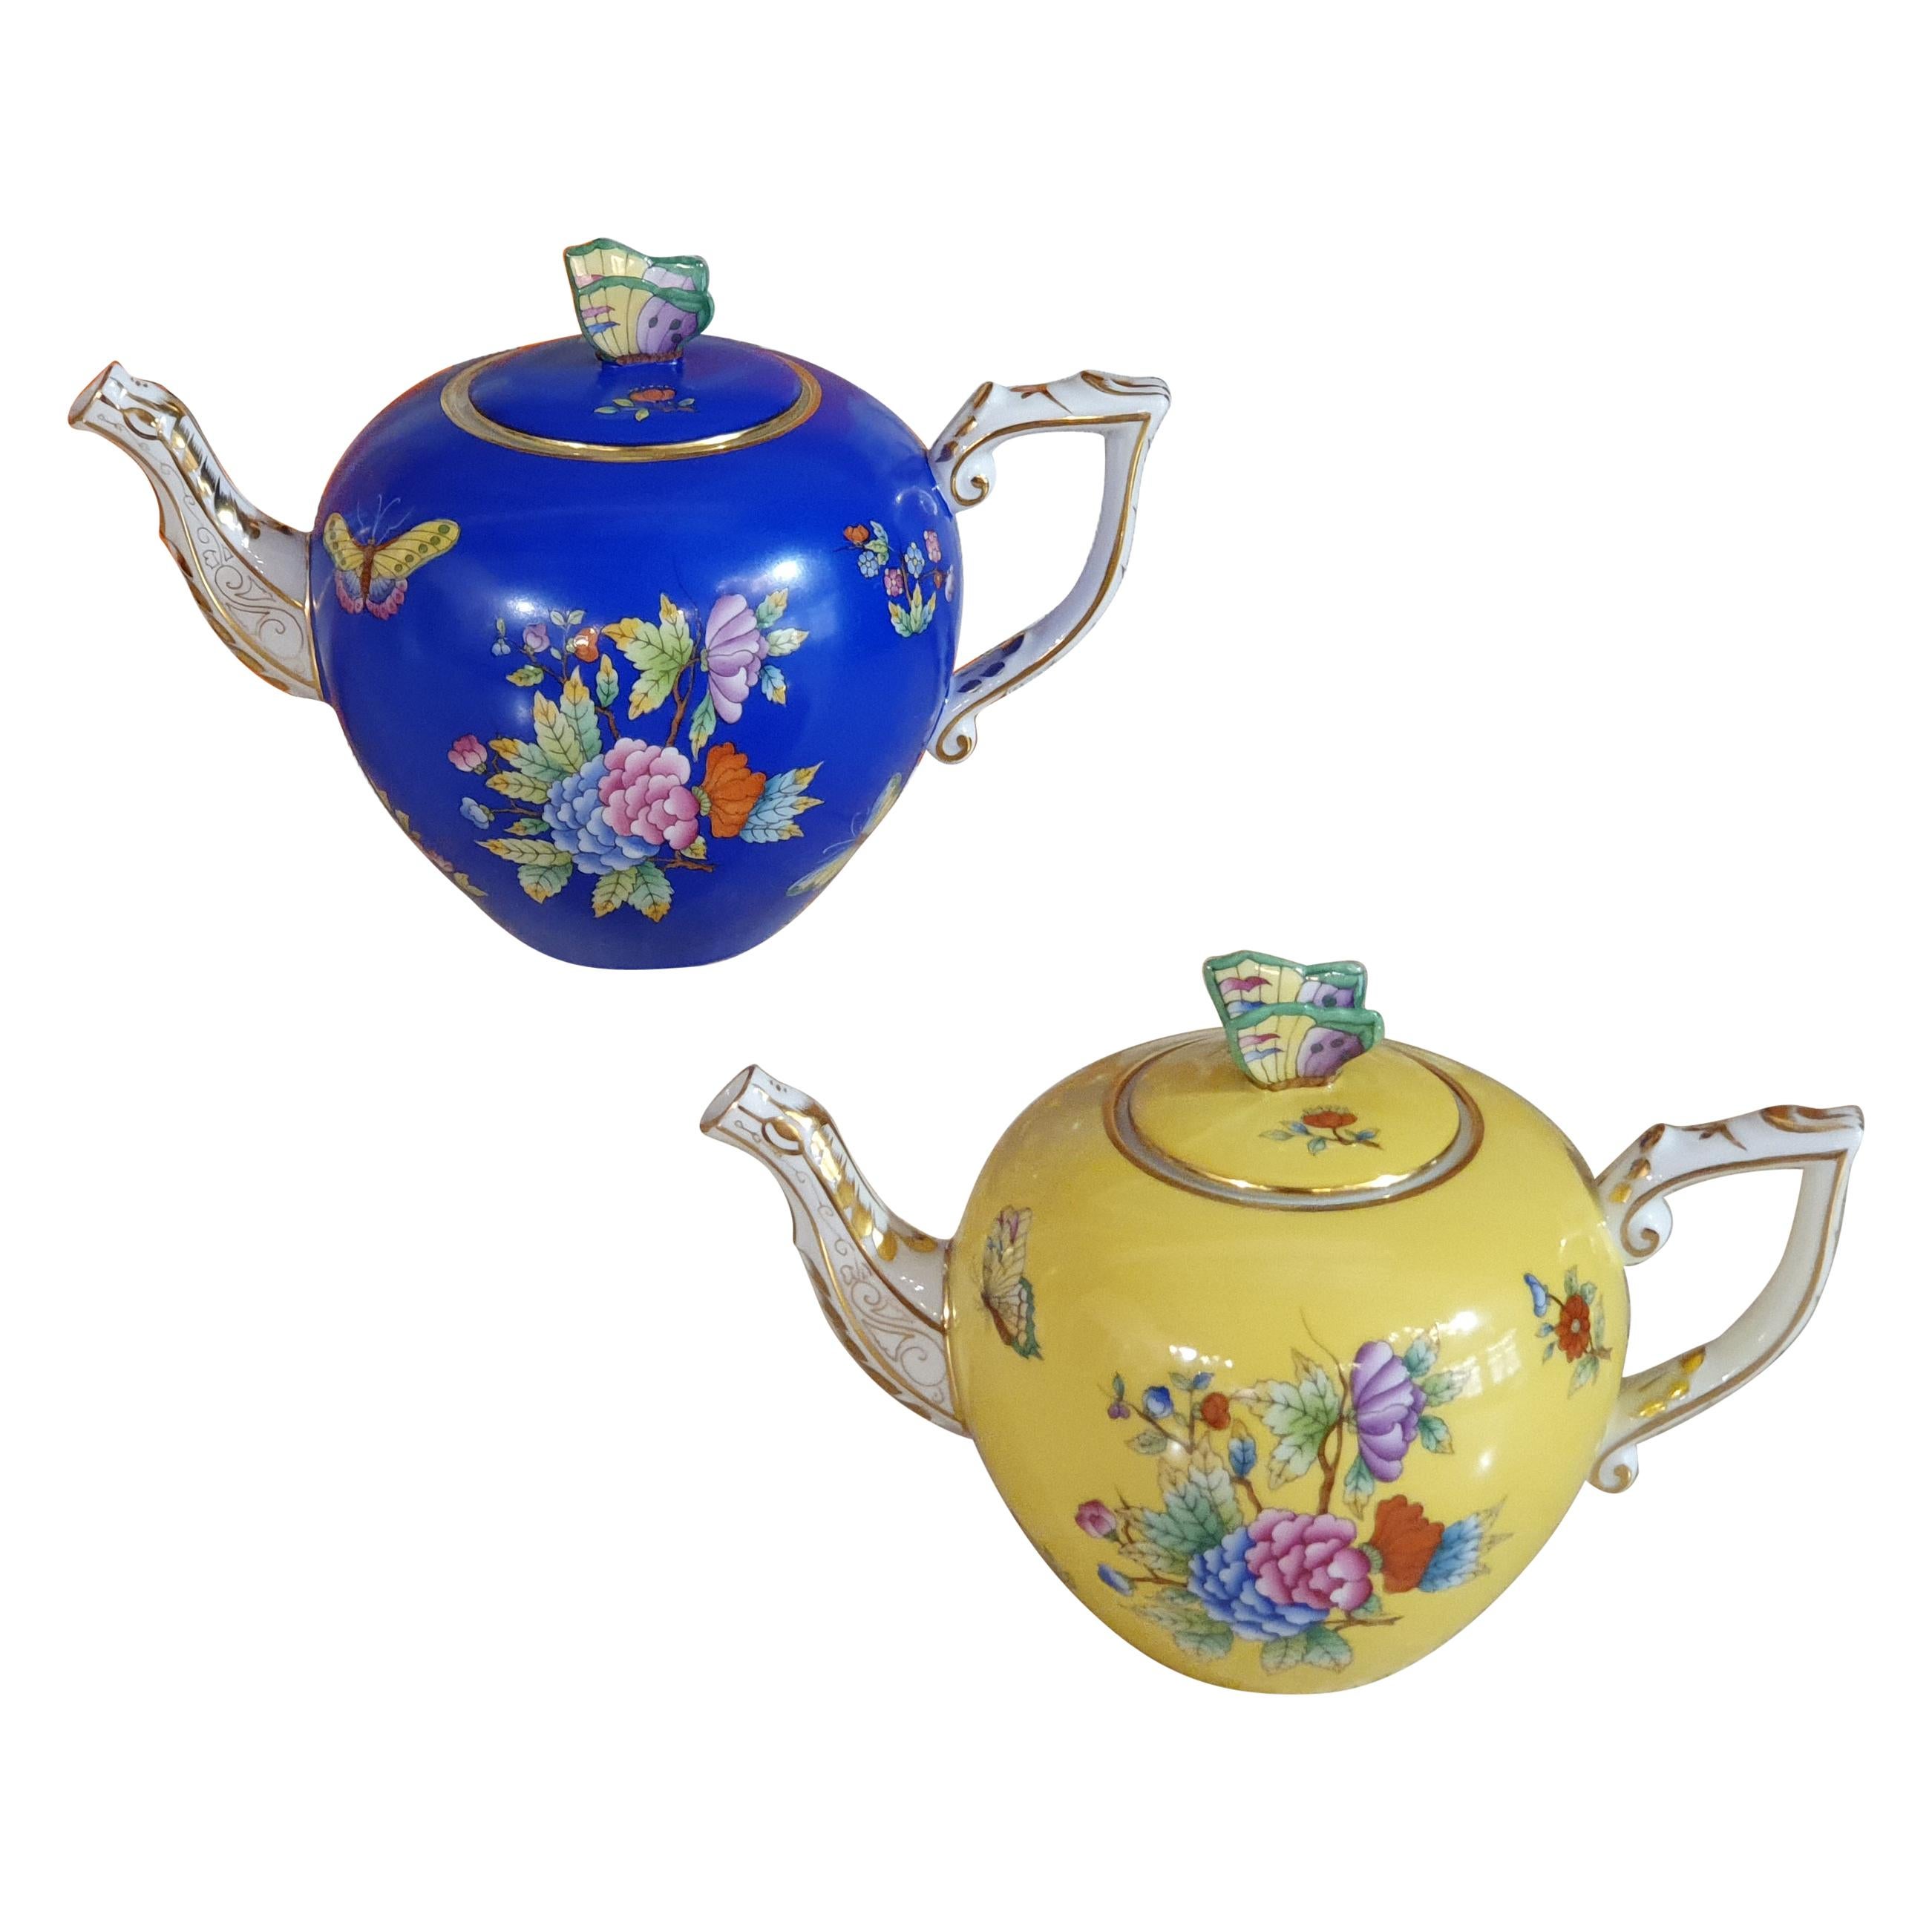 Herend "Victoria" Hand Painted Porcelain Set of Two Teapot, Hungary, Modern